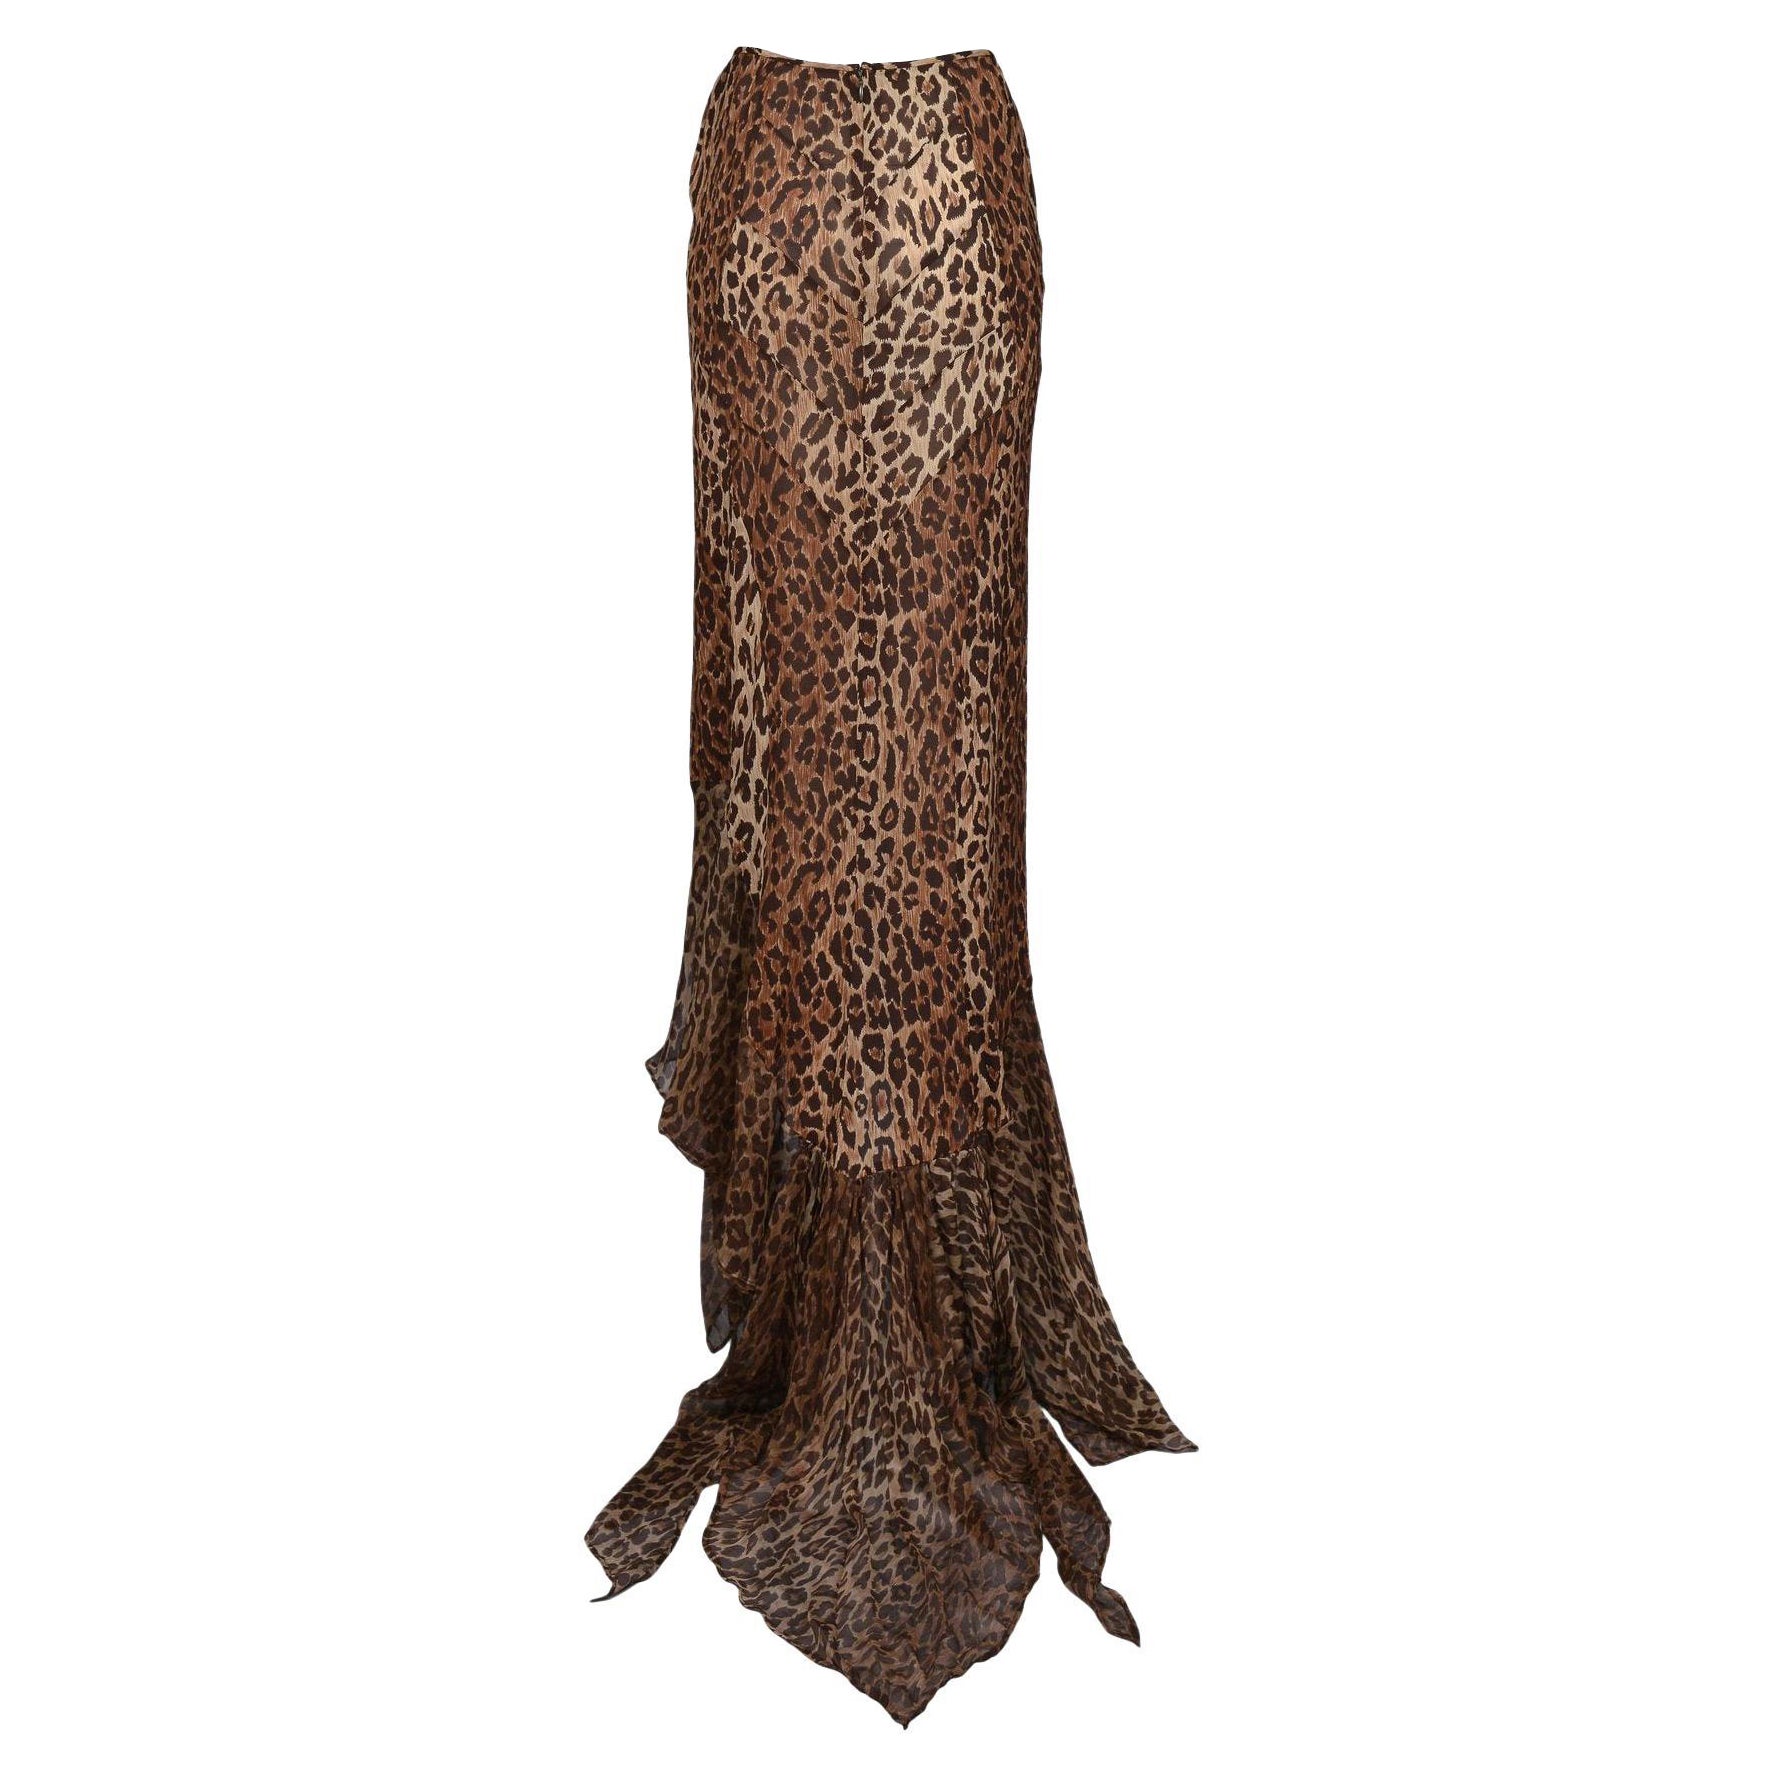 Dolce and Gabbana Iconic Leopard Print Maxi Skirt 1997 at 1stDibs